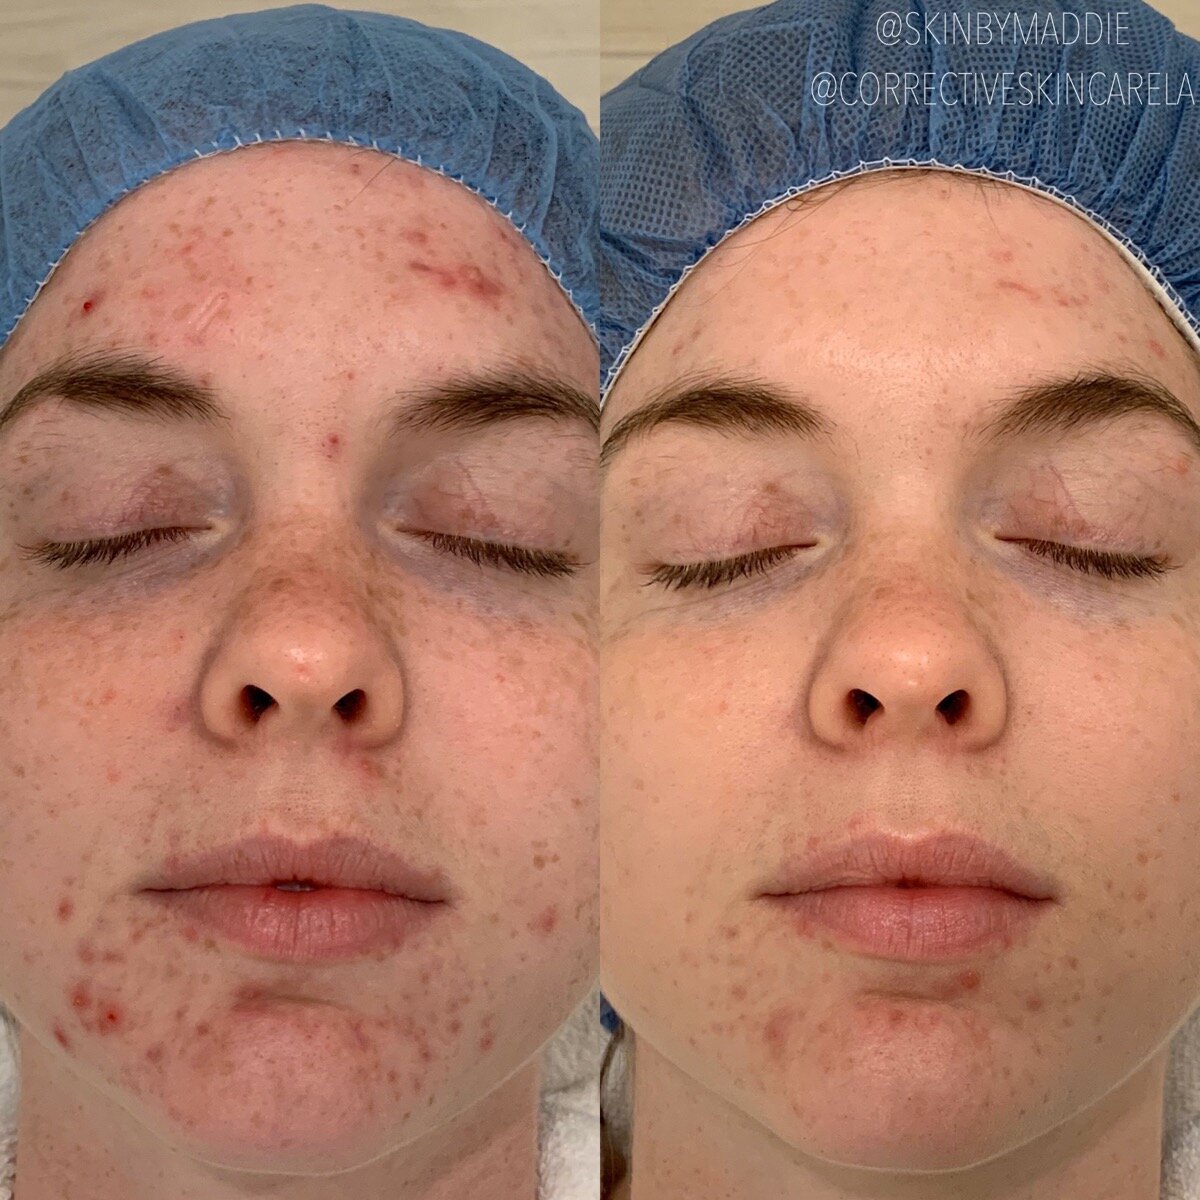 how to deal with adult acne, corrective skincare la